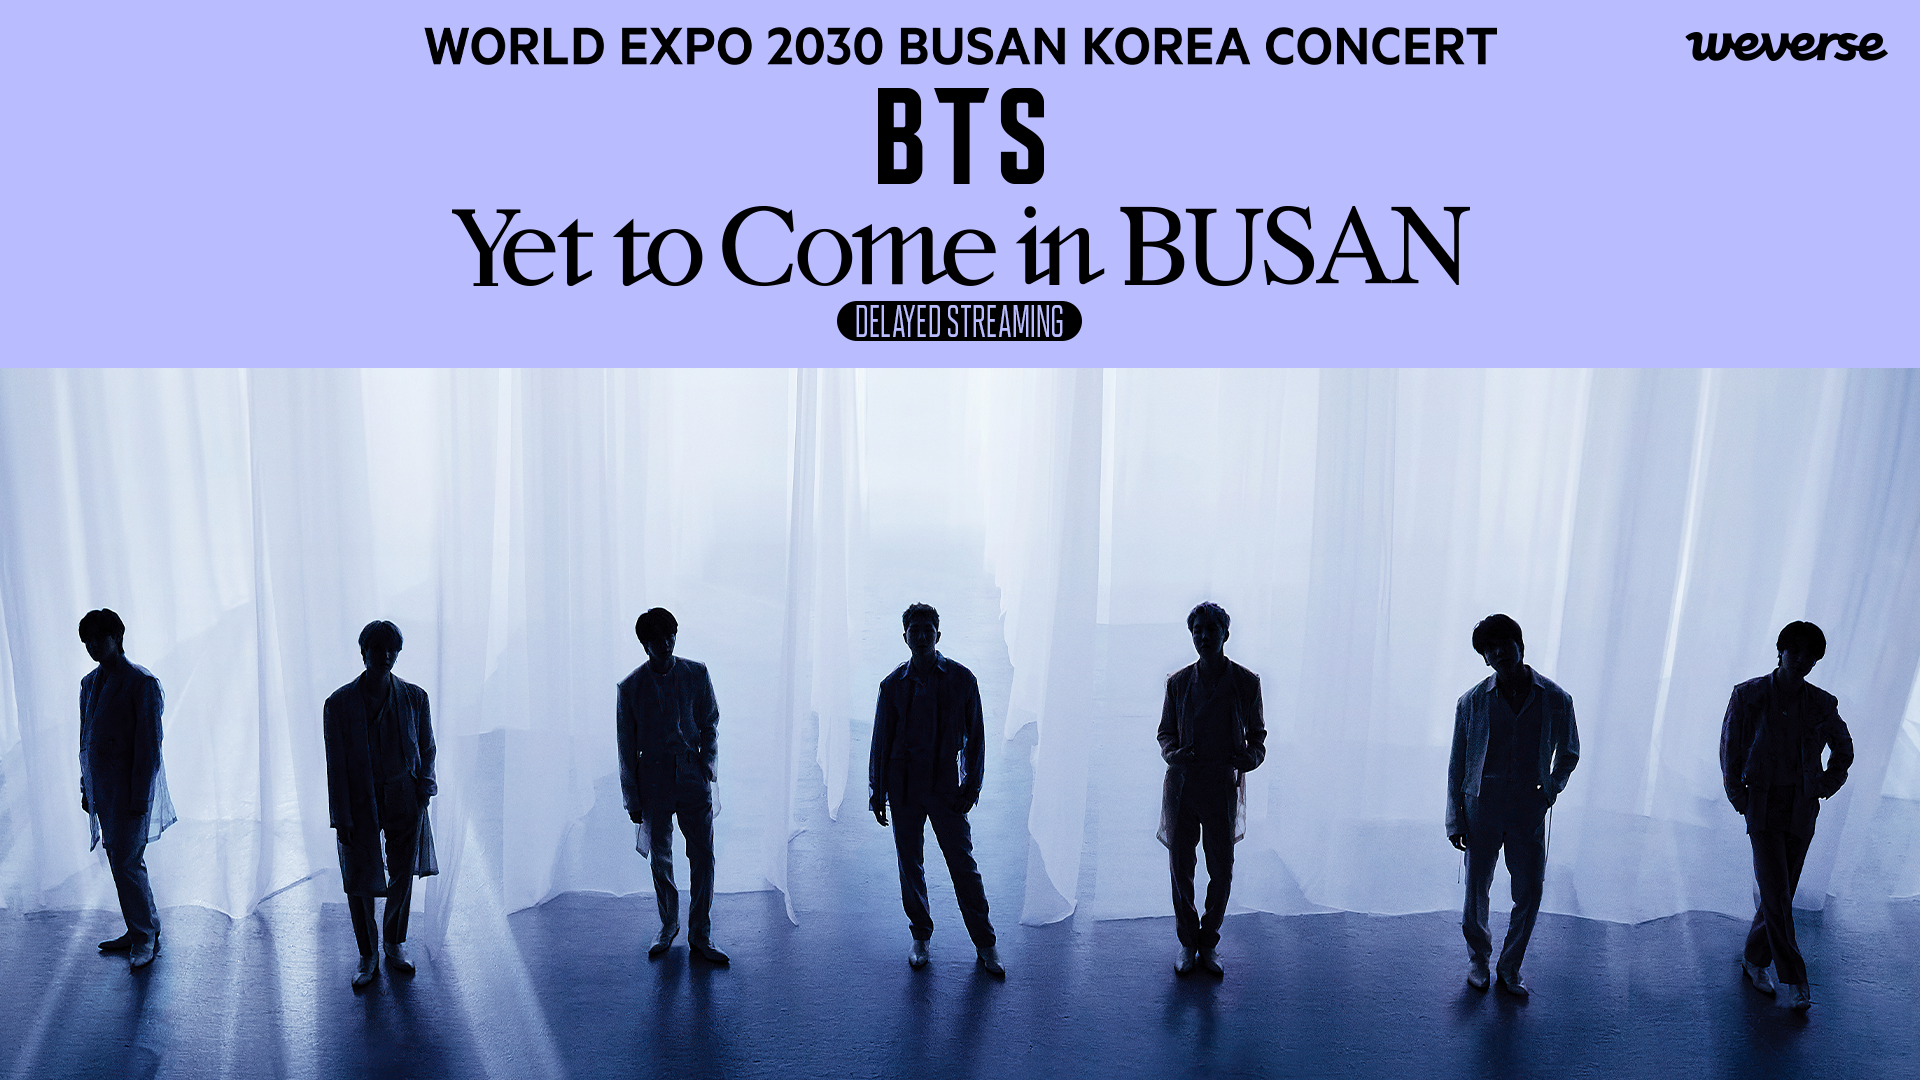 BTS Yet to Come in BUSAN